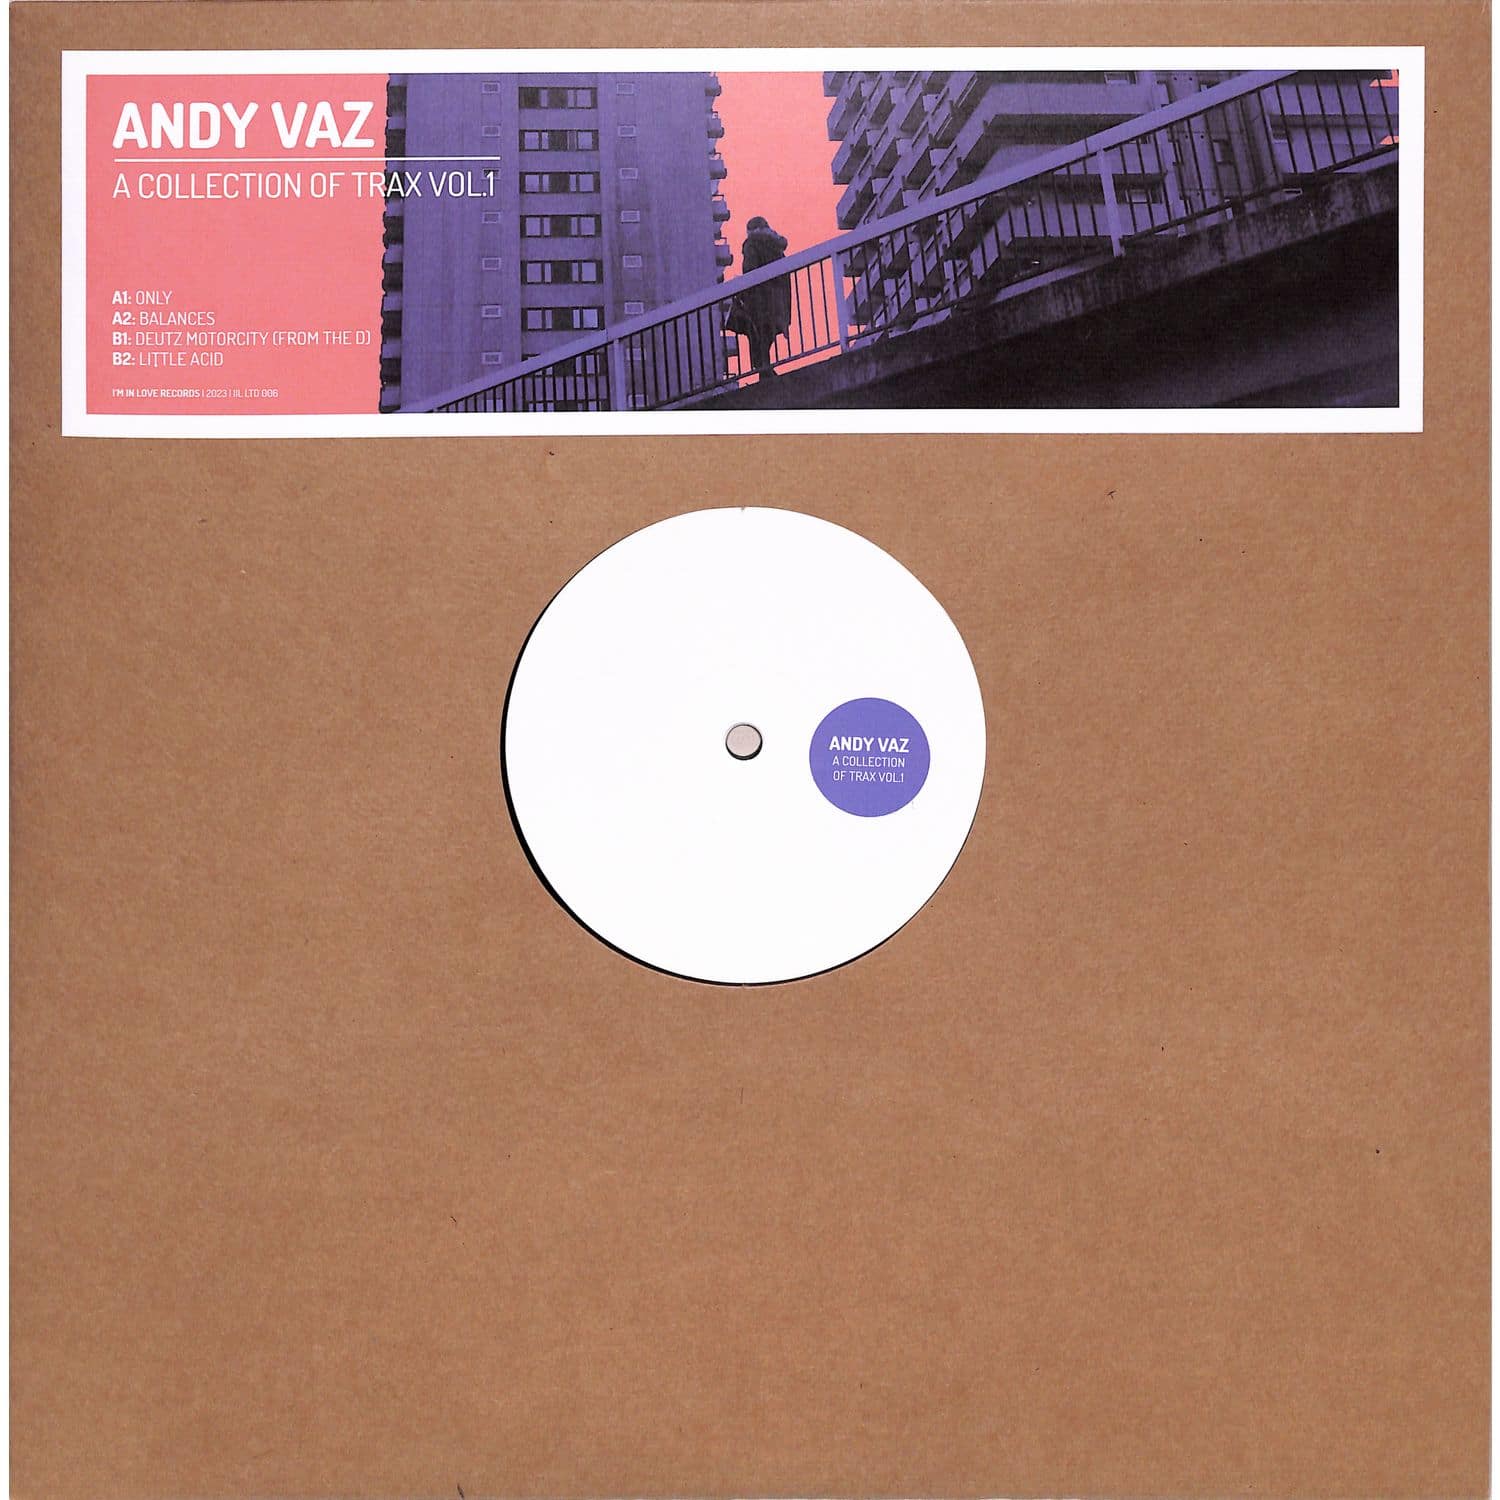 Andy Vaz - A COLLECTION OF TRAX VOL. 1